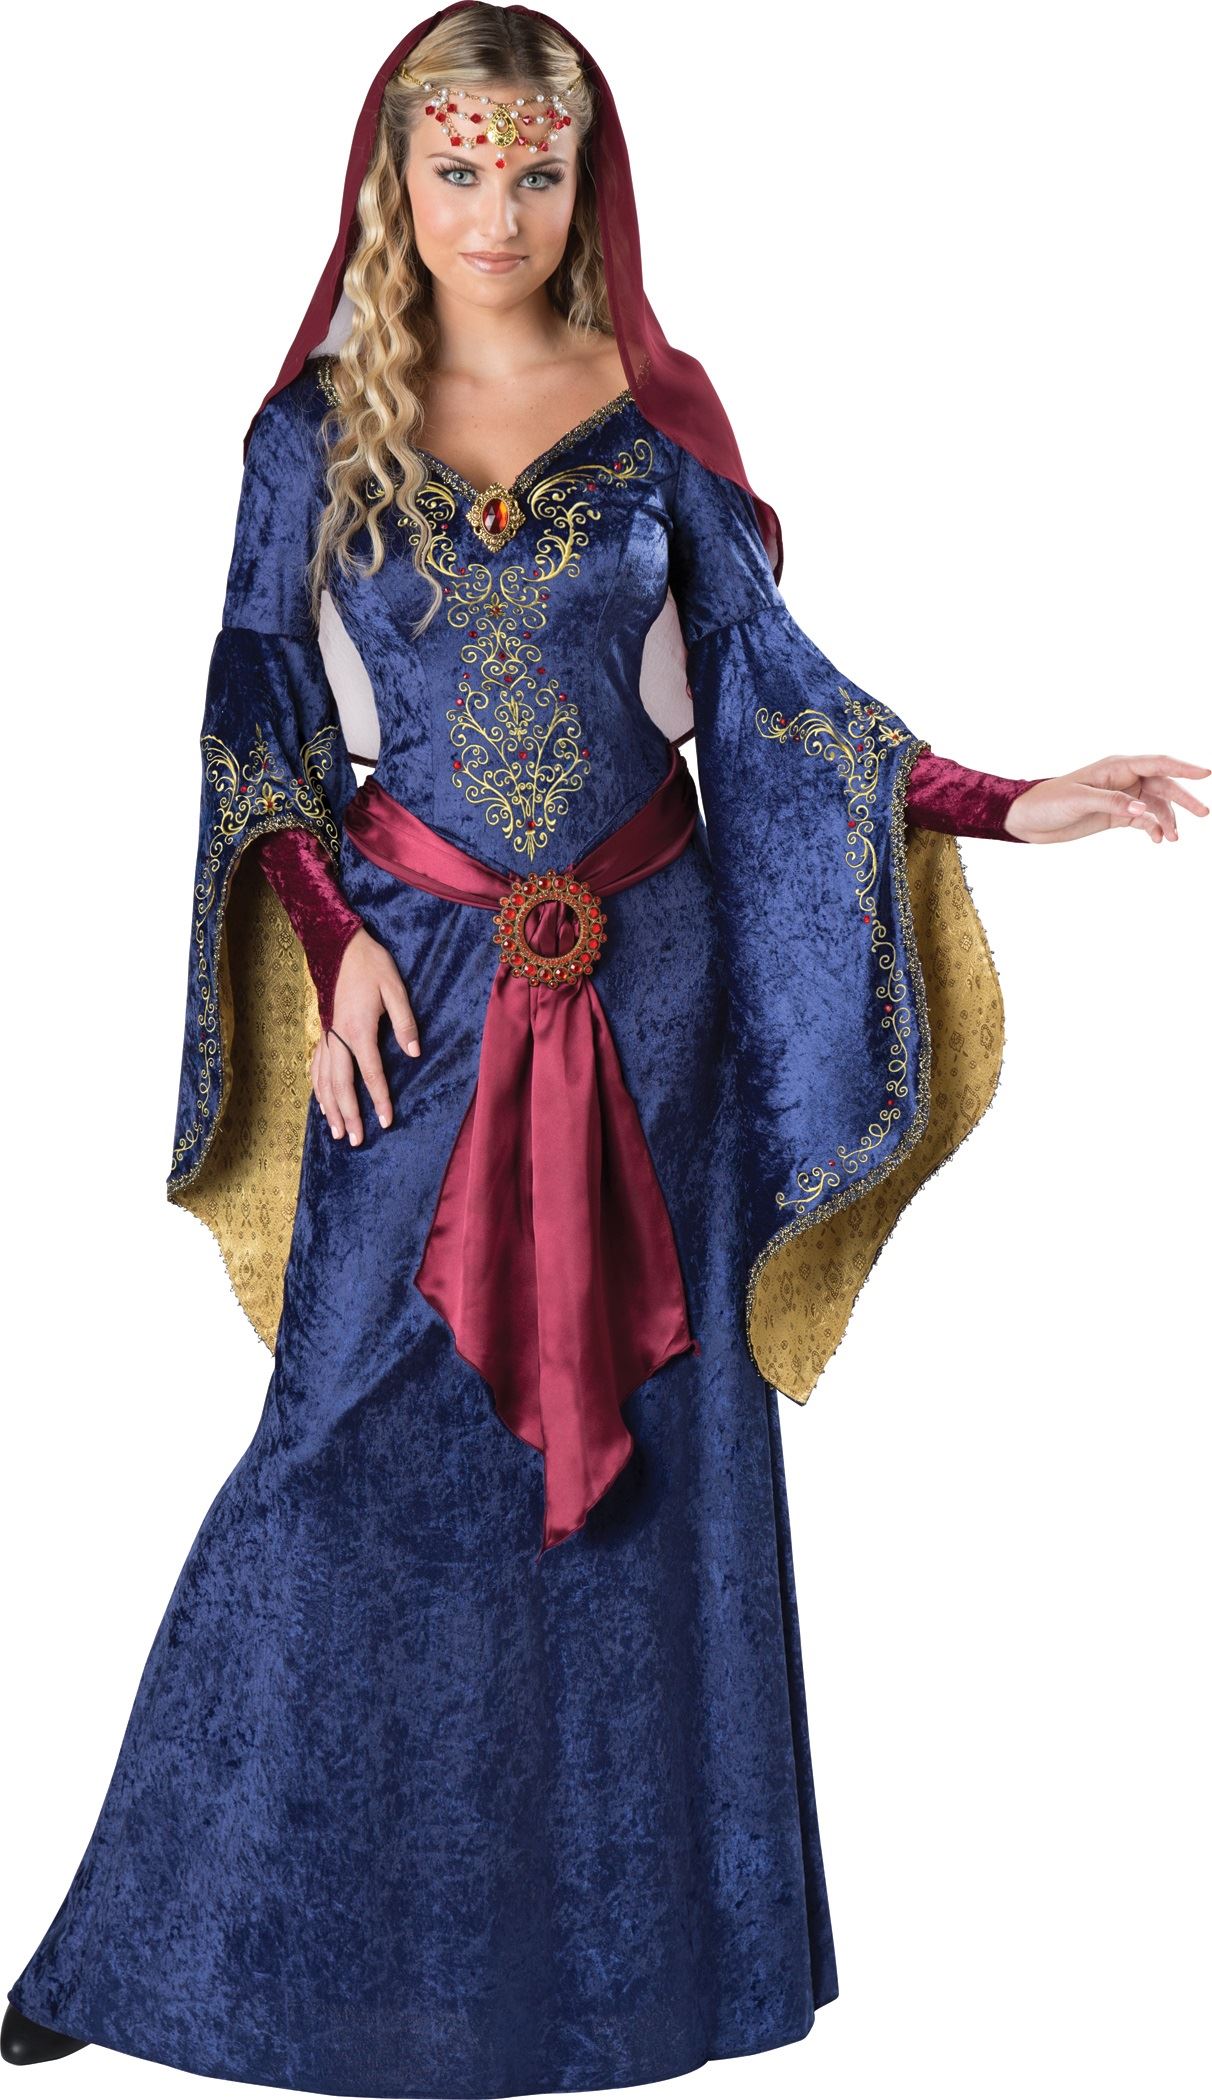 Adult Maid Marian Woman Medieval Costume 12599 The Costume Land